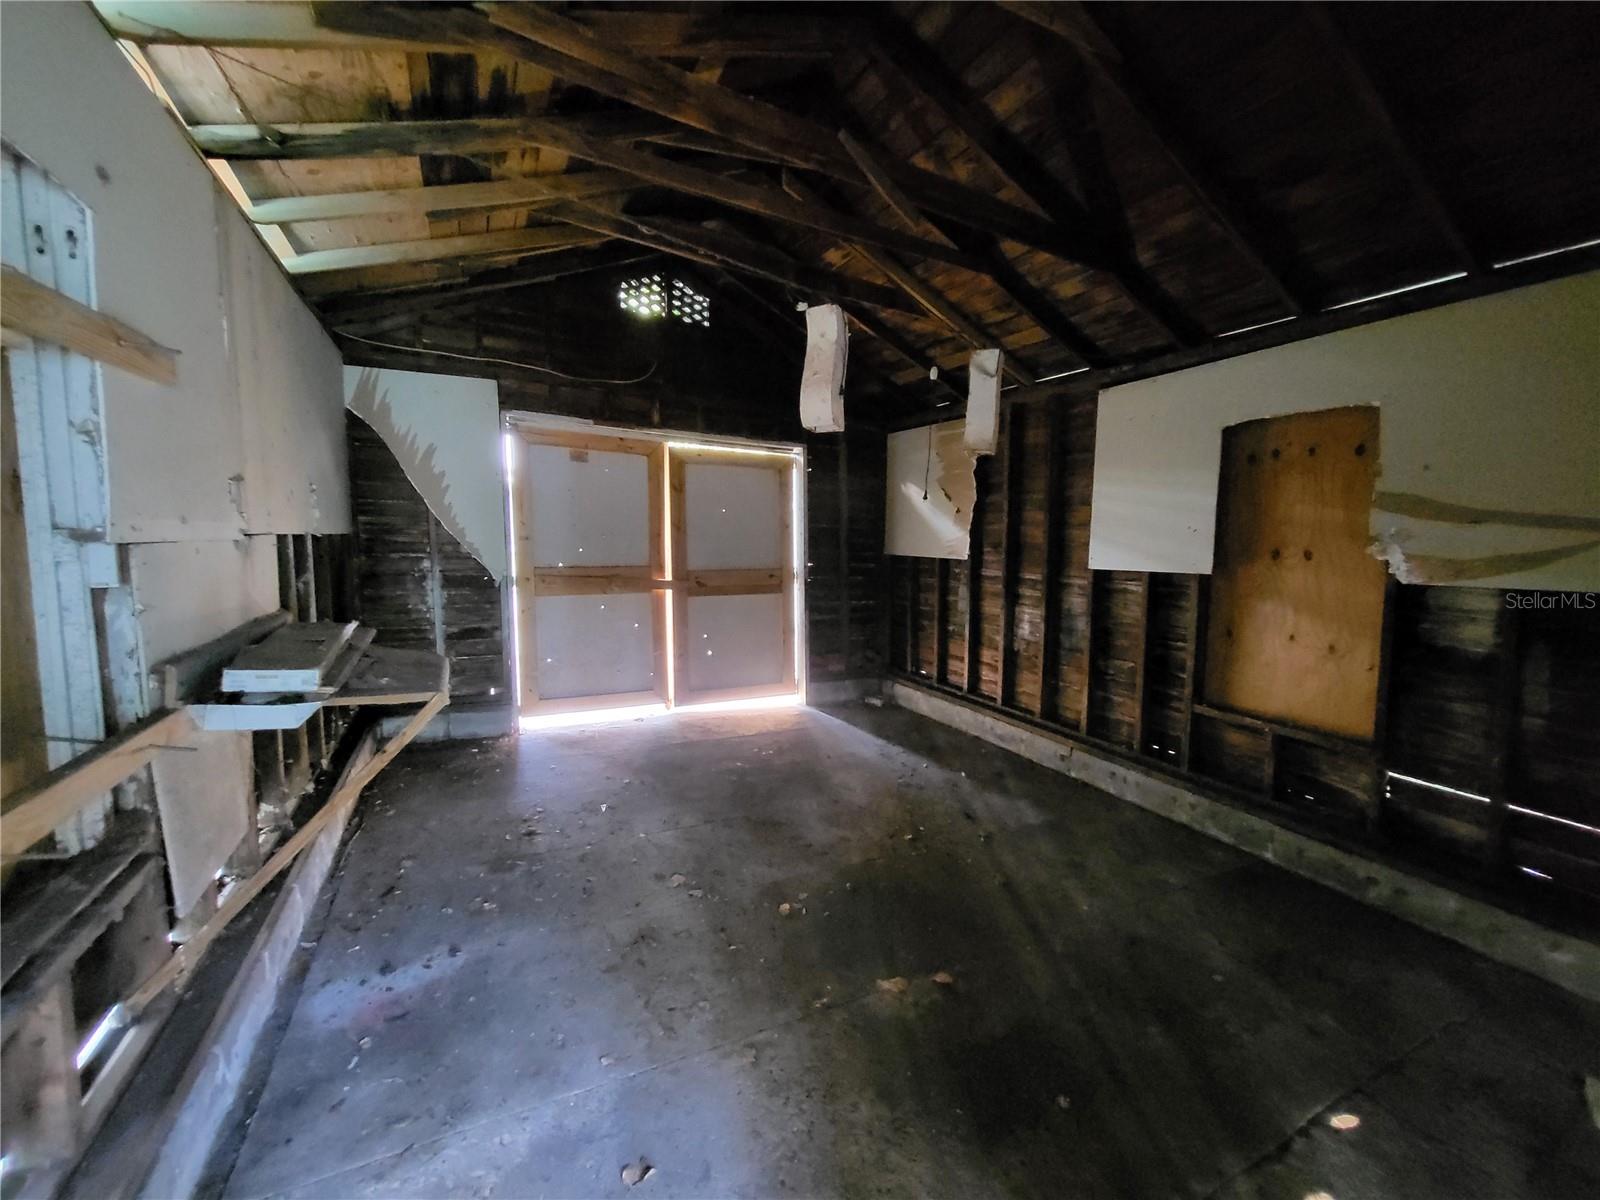 Unfinished garage has potential!  Transform this space into a workshop, garage, gameroom or possibly even an efficiency rental unit